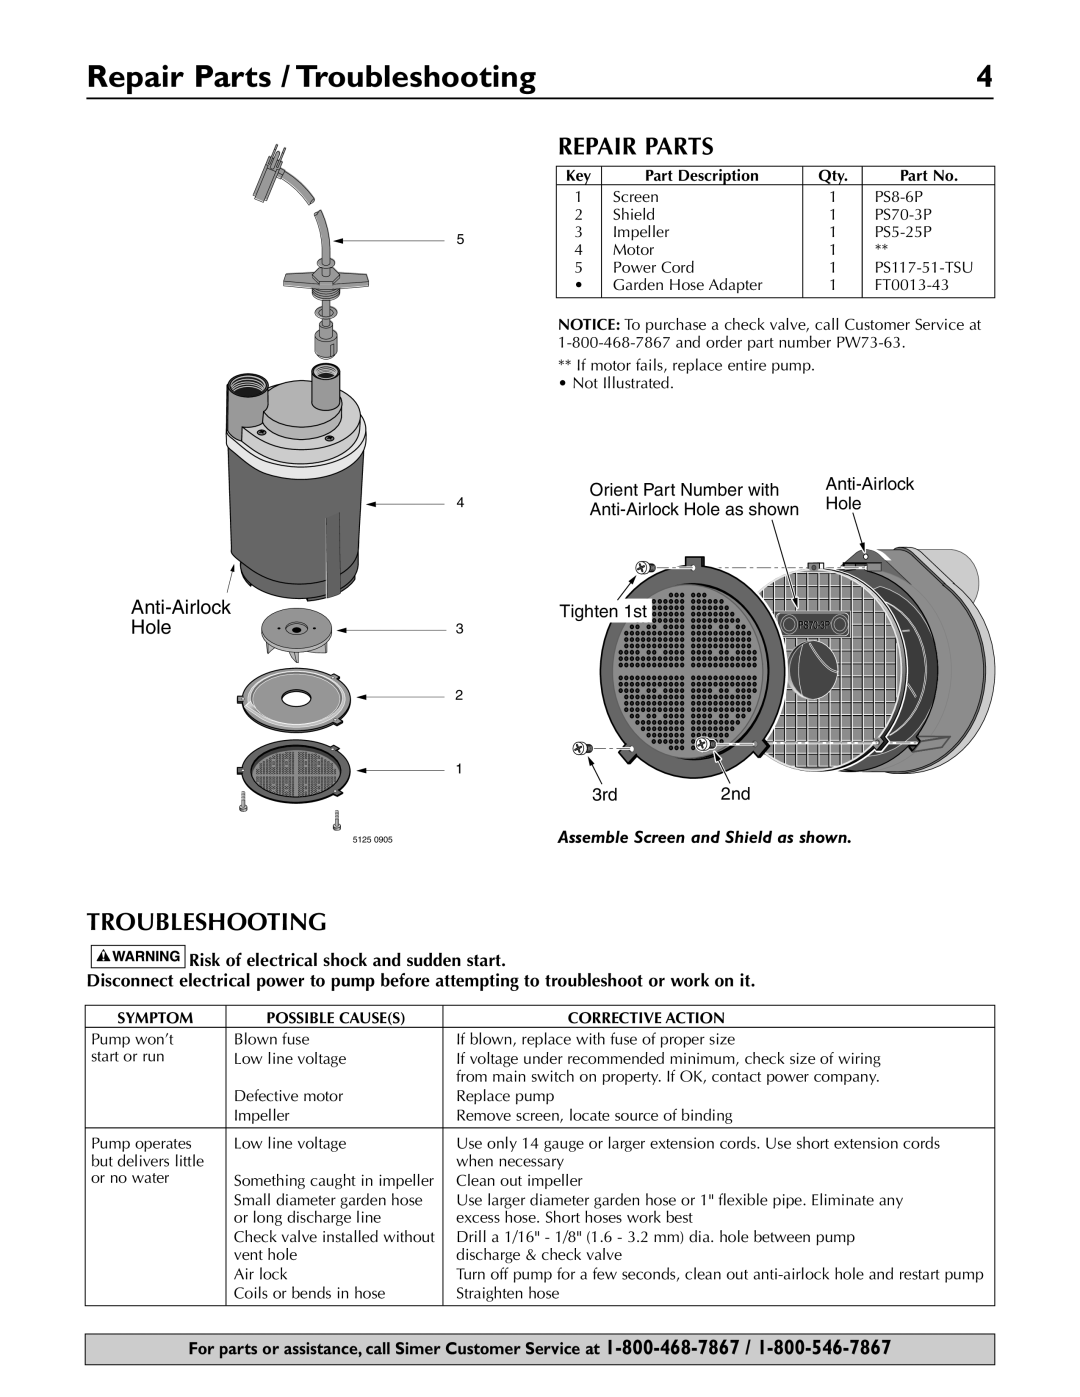 Simer Pumps 2330-03 owner manual Repair Parts / Troubleshooting, Anti-AirlockHole, Assemble Screen and Shield as shown 